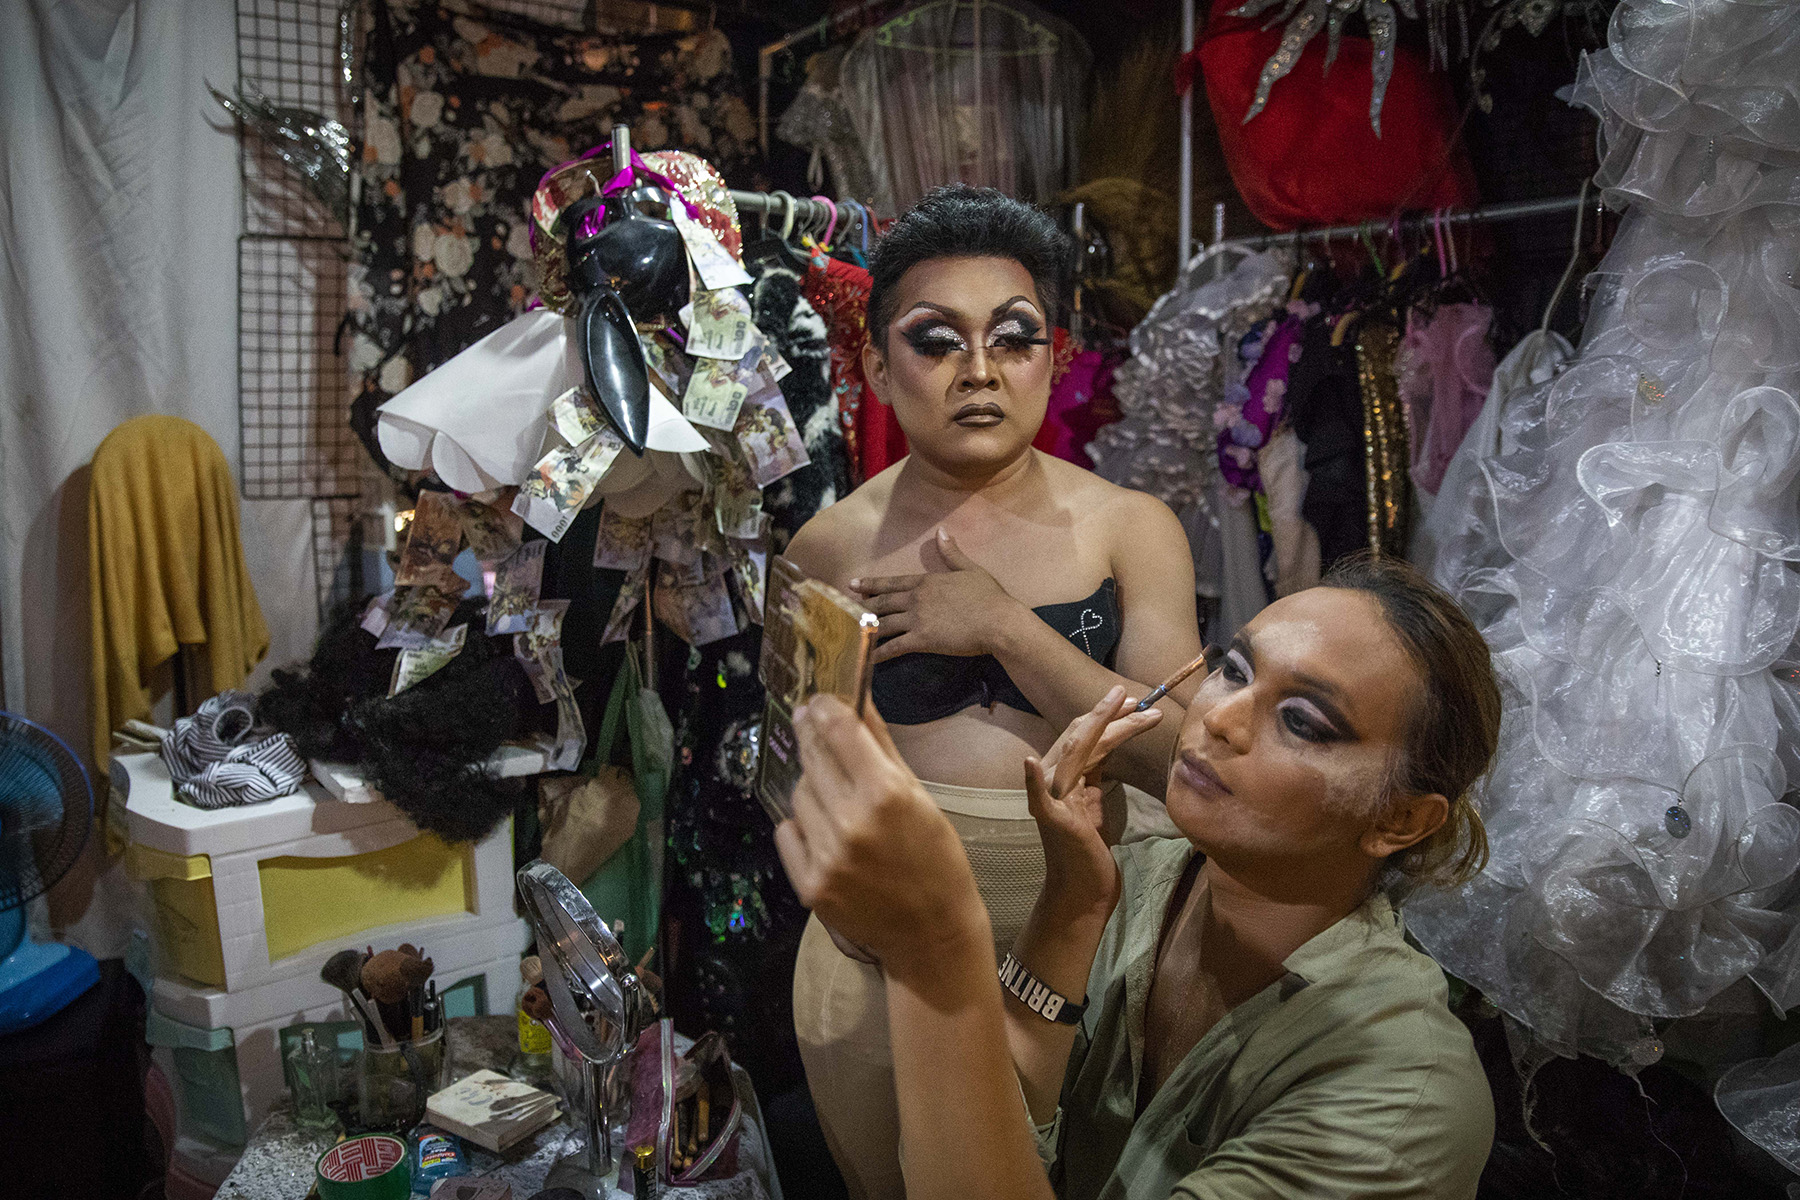 Miss Srimala helps Gisele, both drag performers, with her makeup before they go on stage.